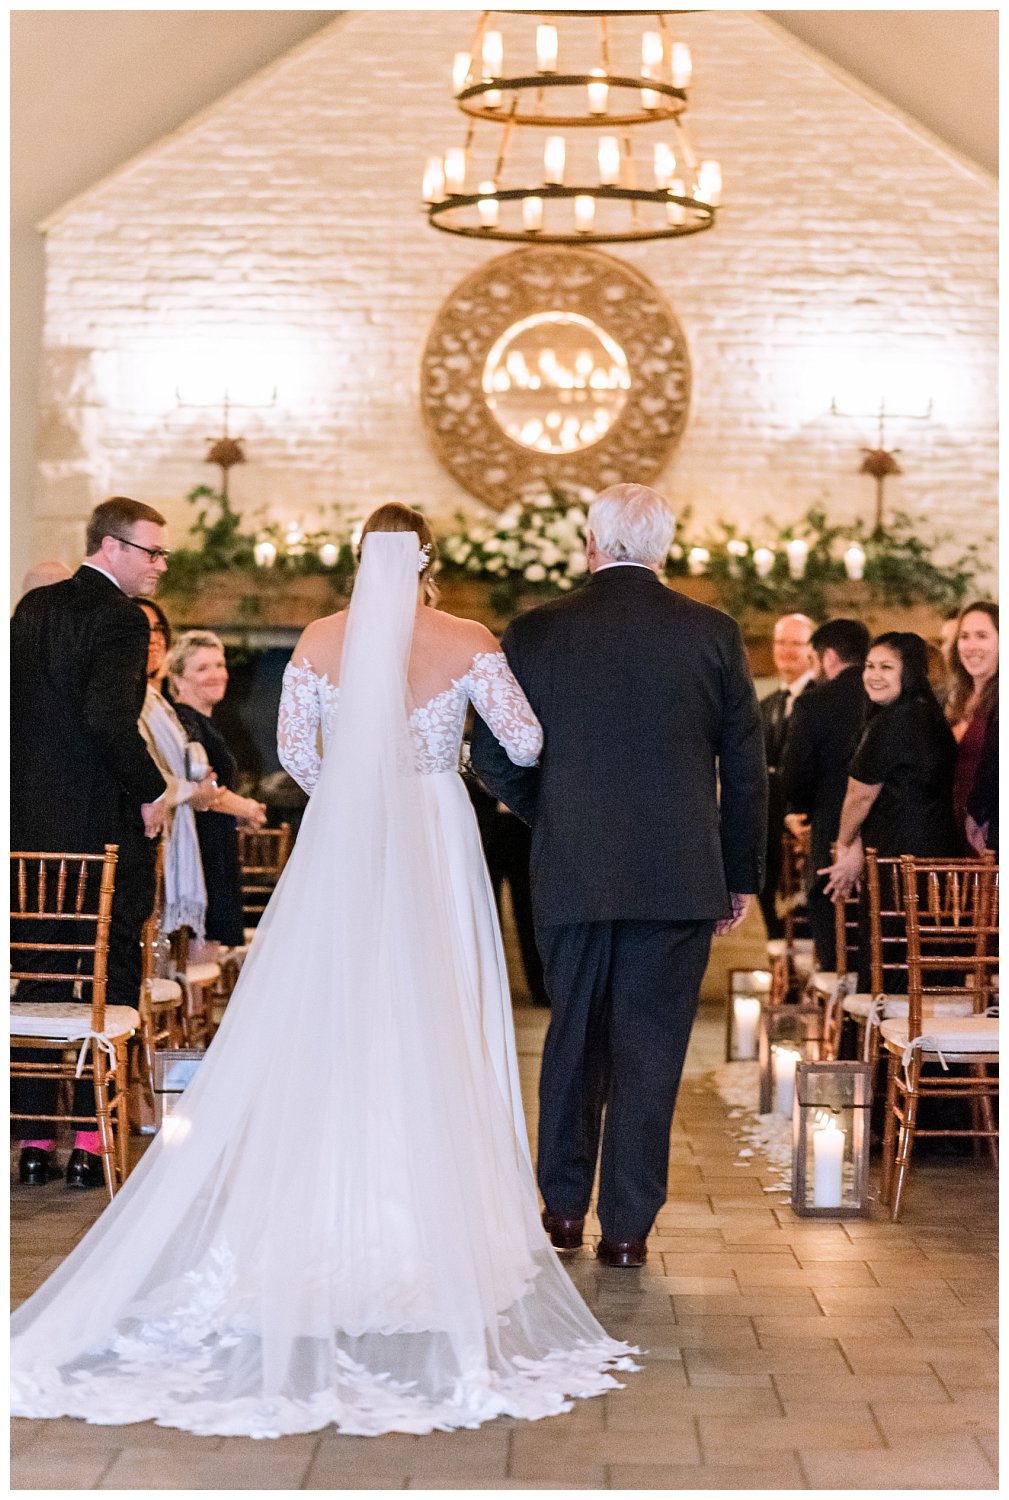 Father escorting bride down the aisle at Early Mountain Vineyard in Charlottesville, Virginia